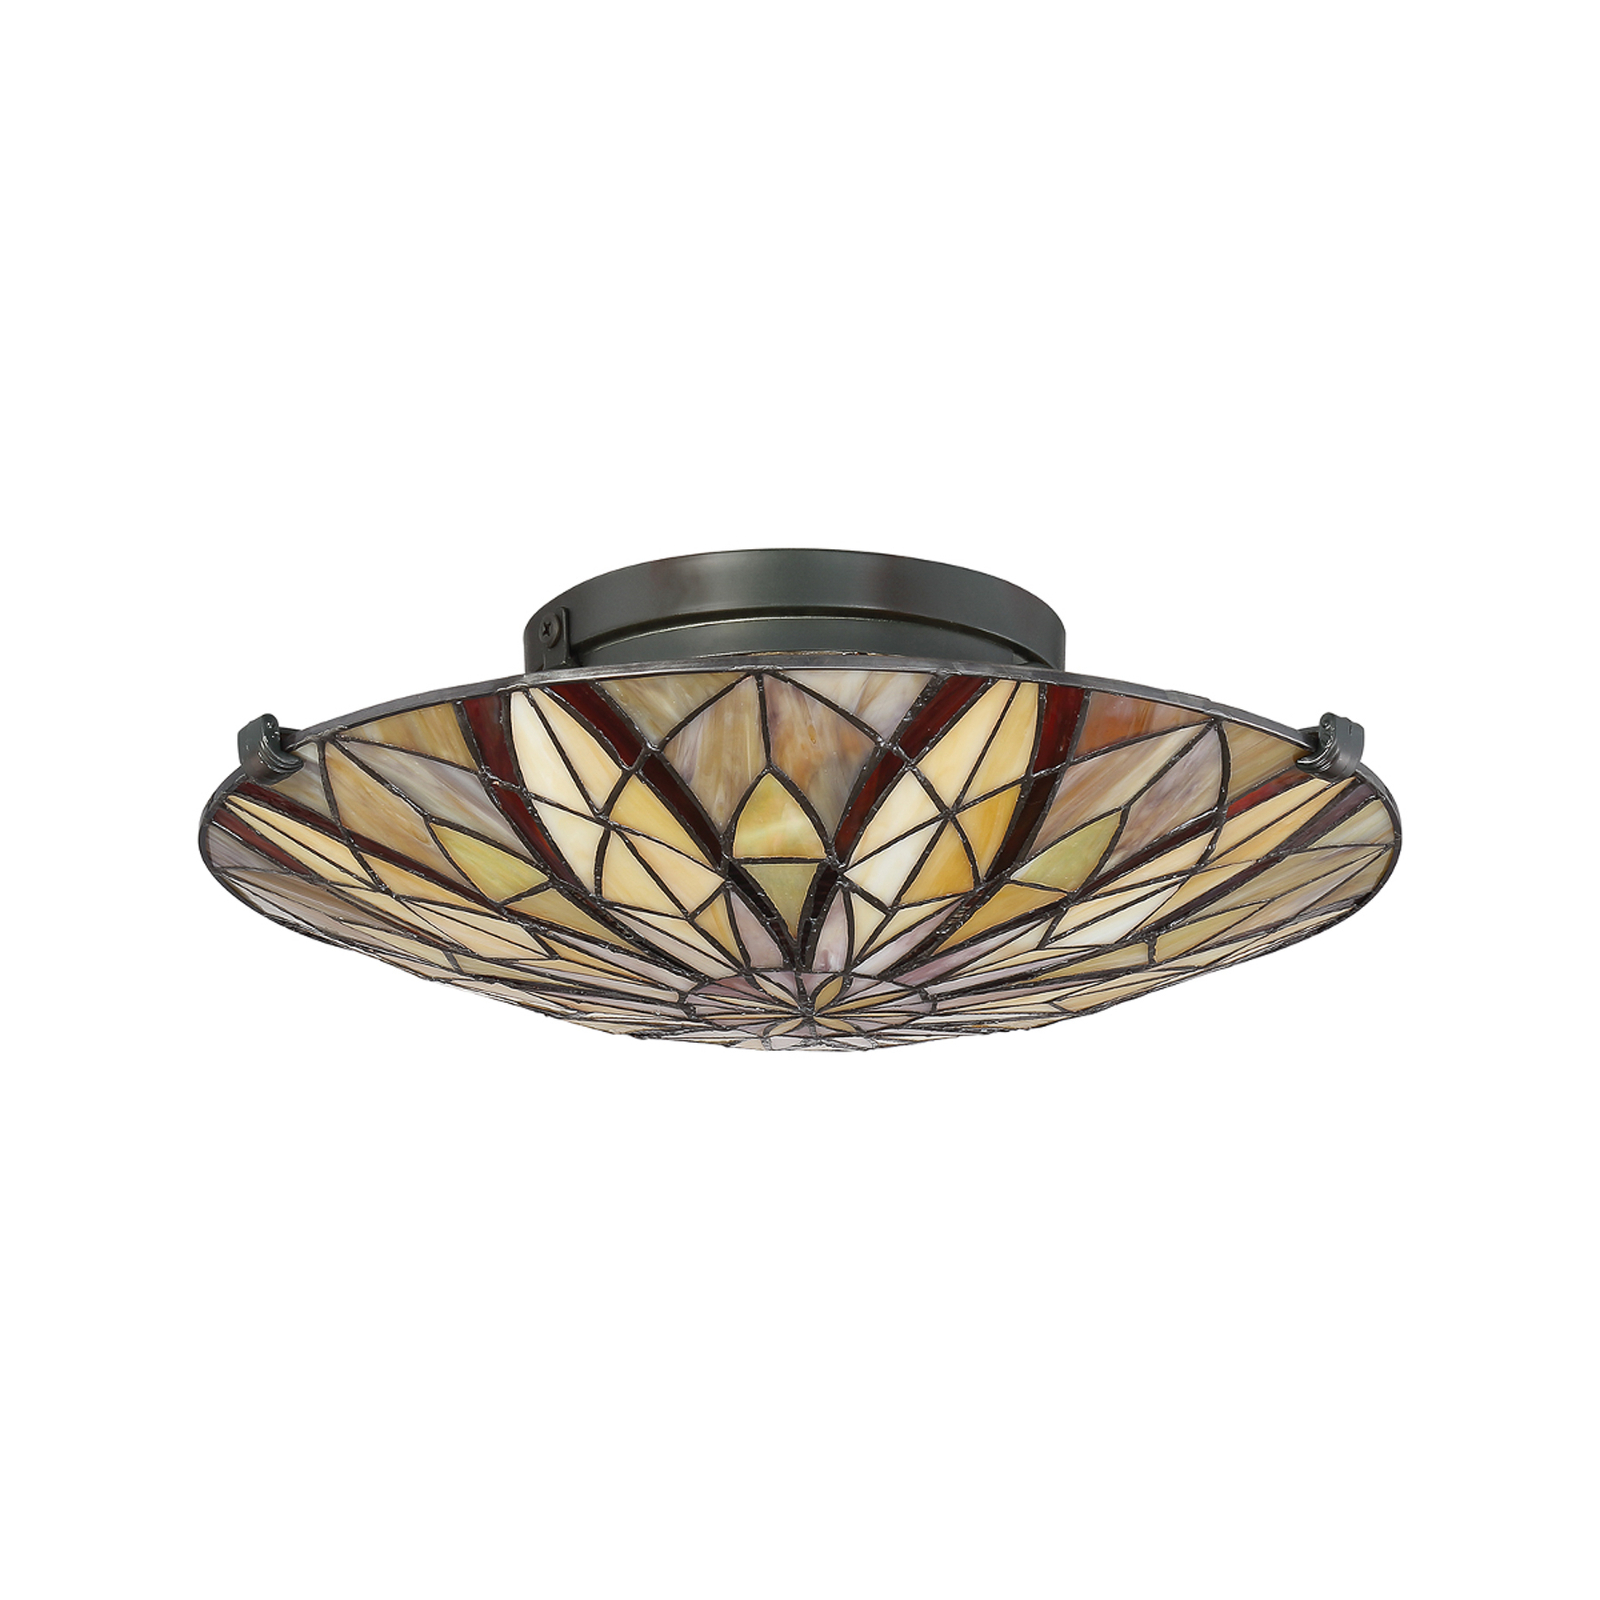 Victory ceiling light, Tiffany-style lampshade